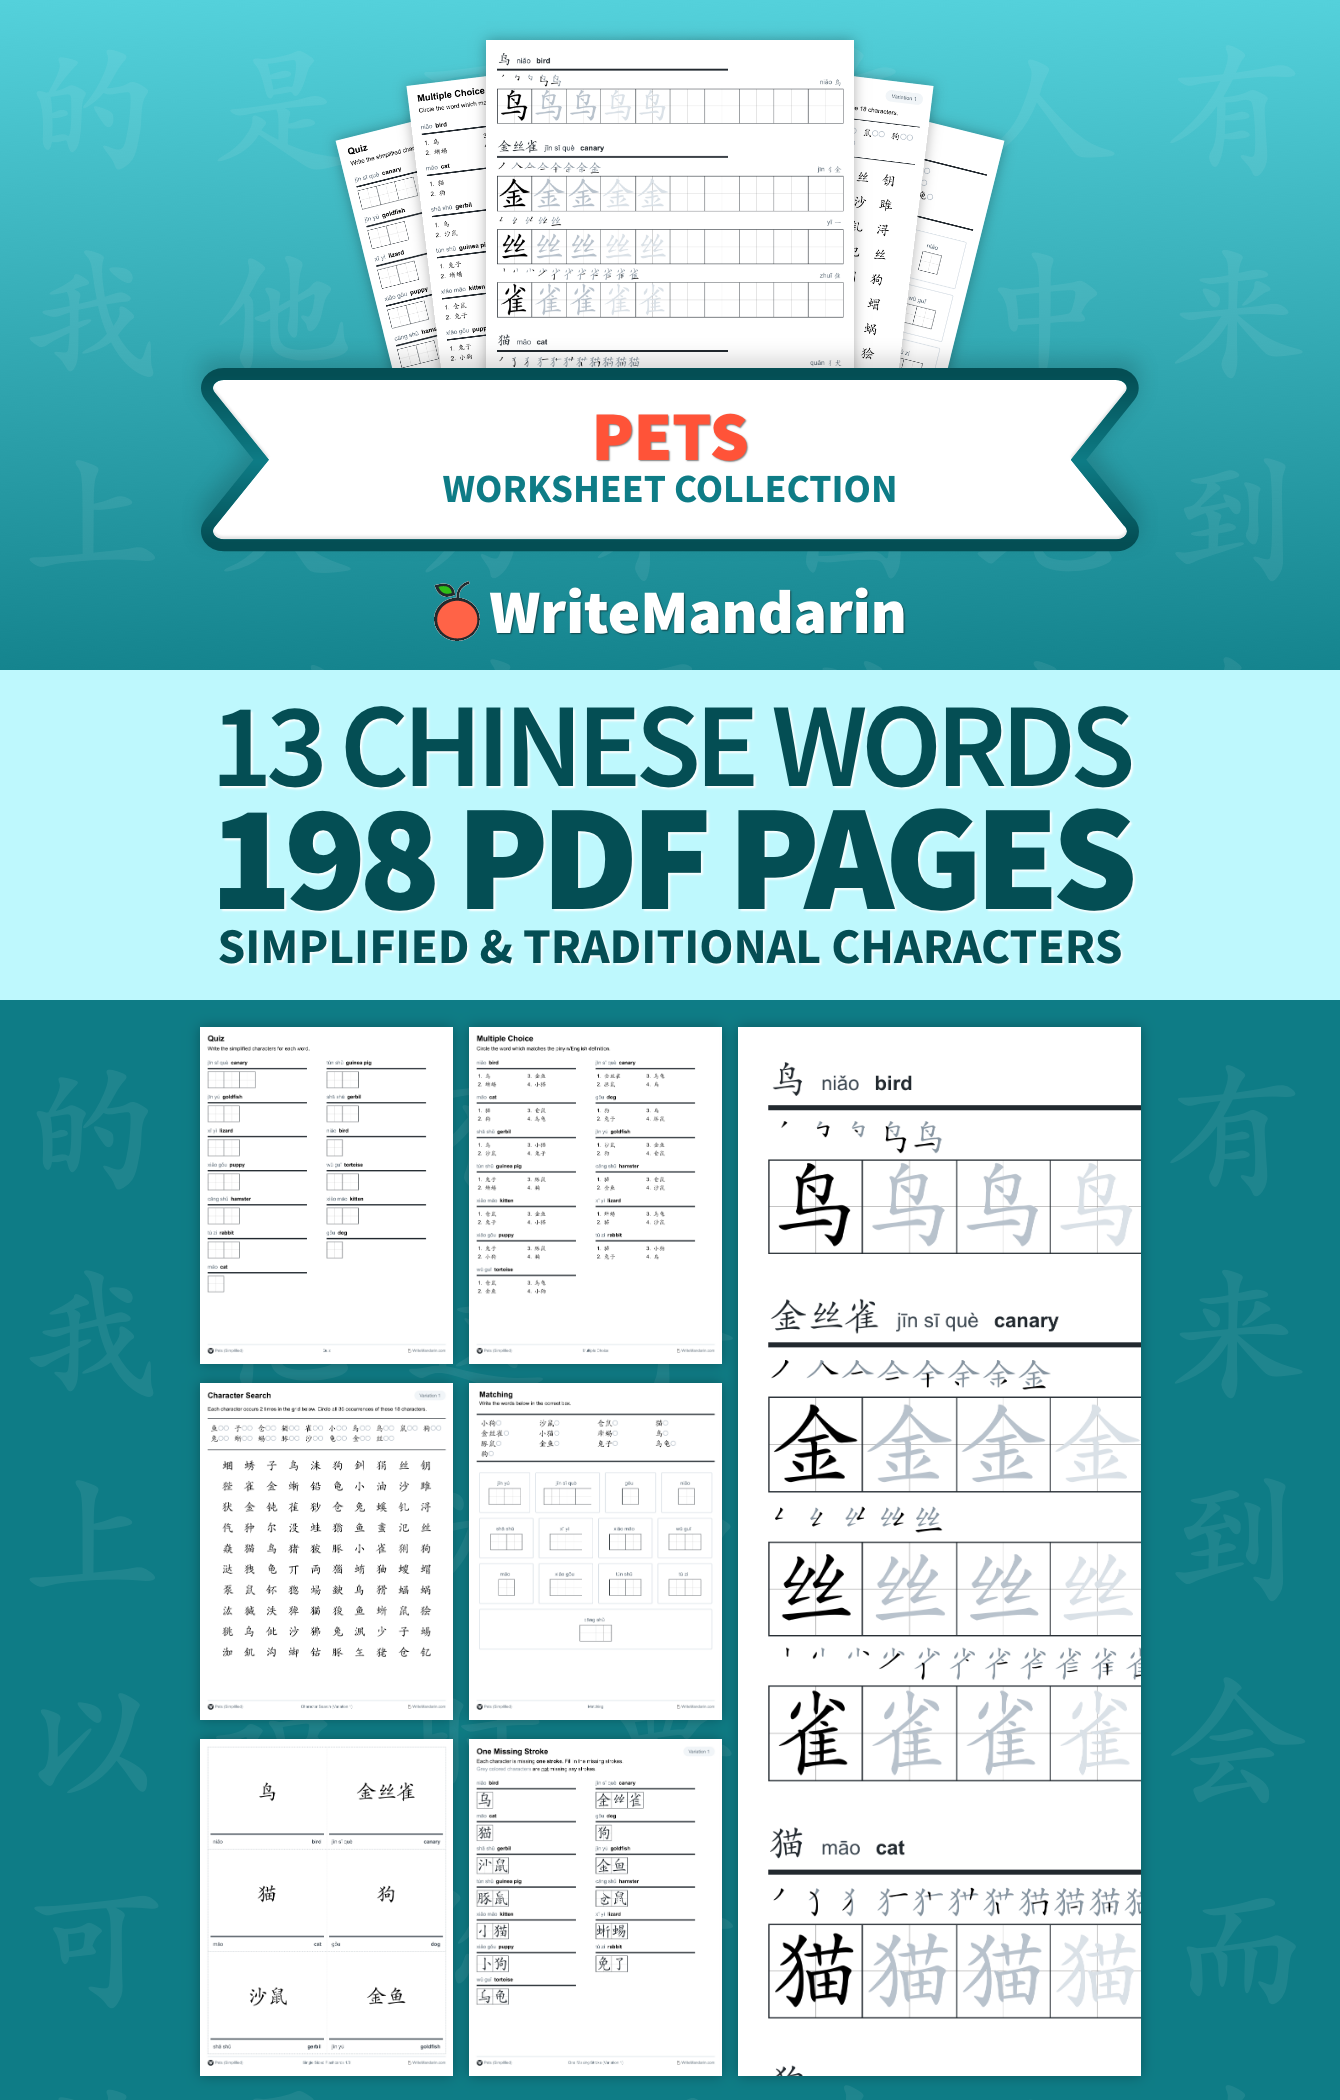 Preview image of Pets worksheet collection